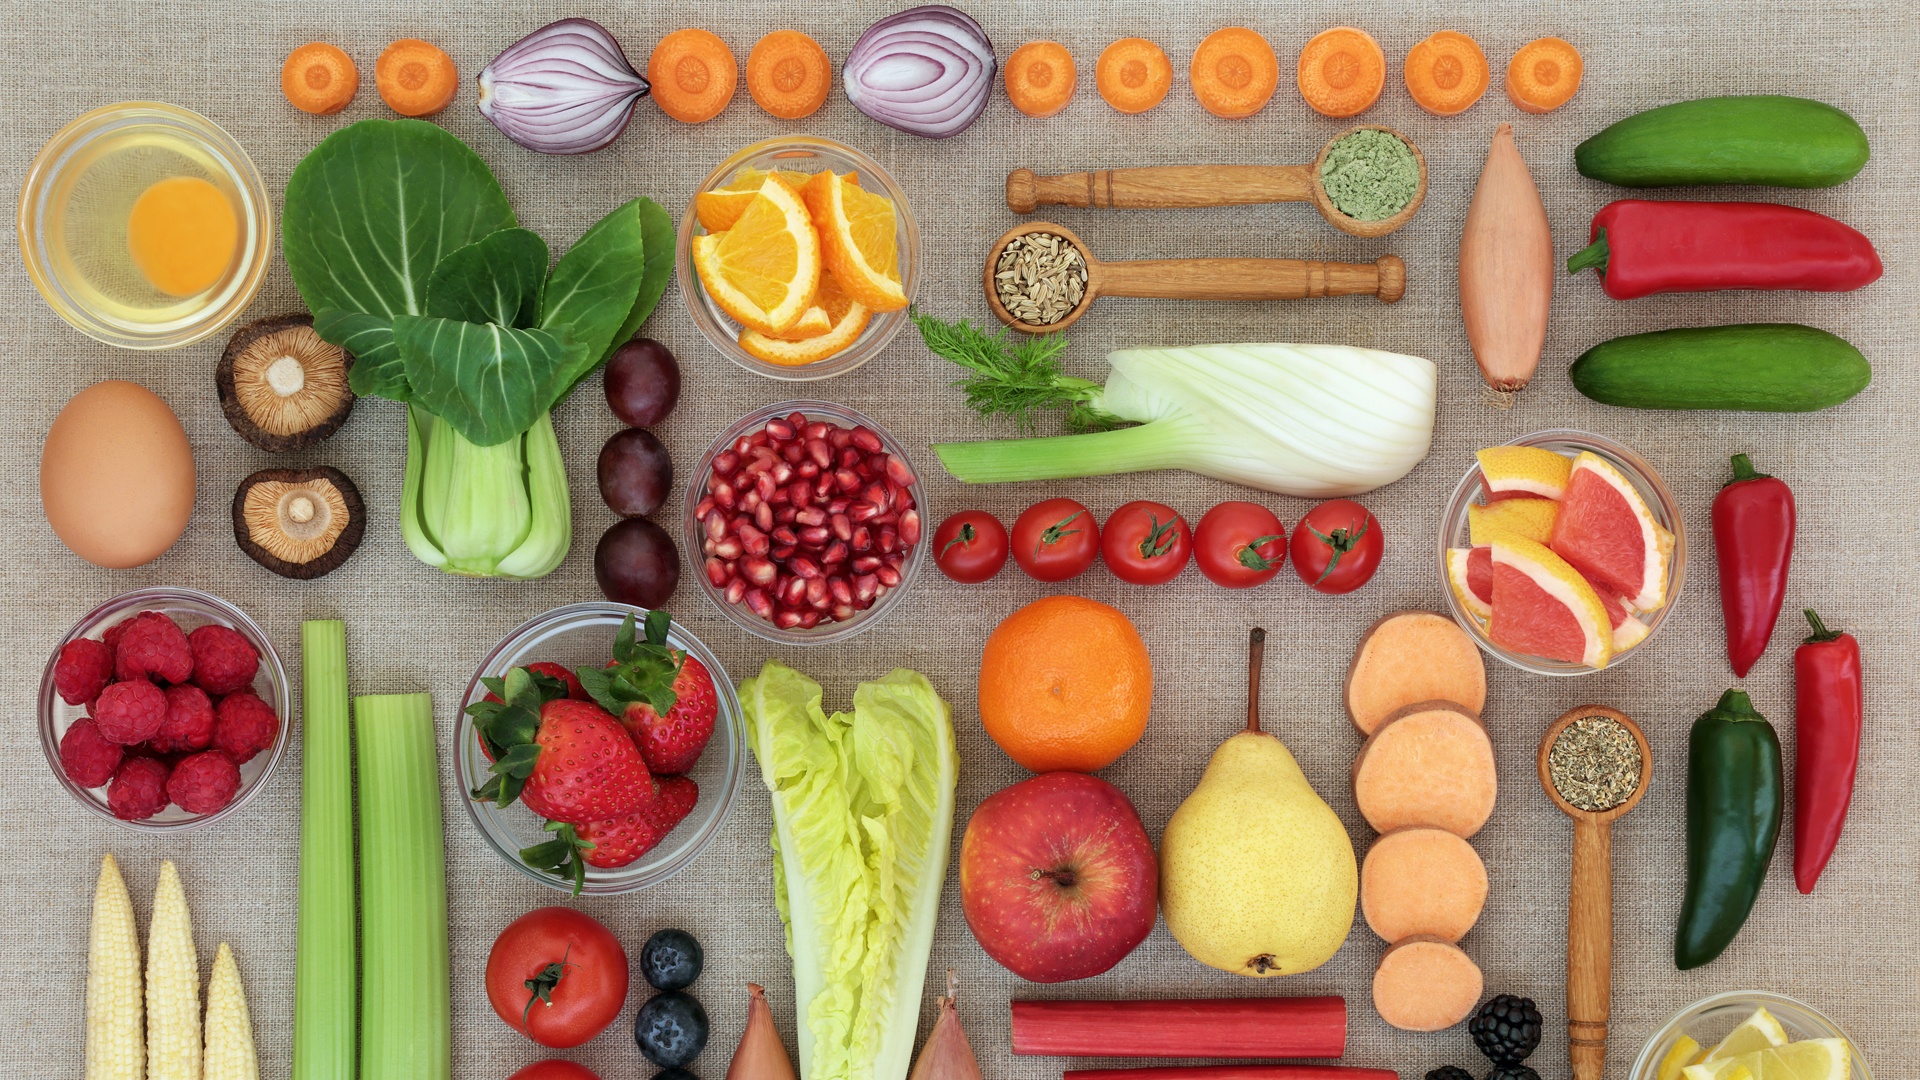 An array of fruits, vegetables, and protein options.